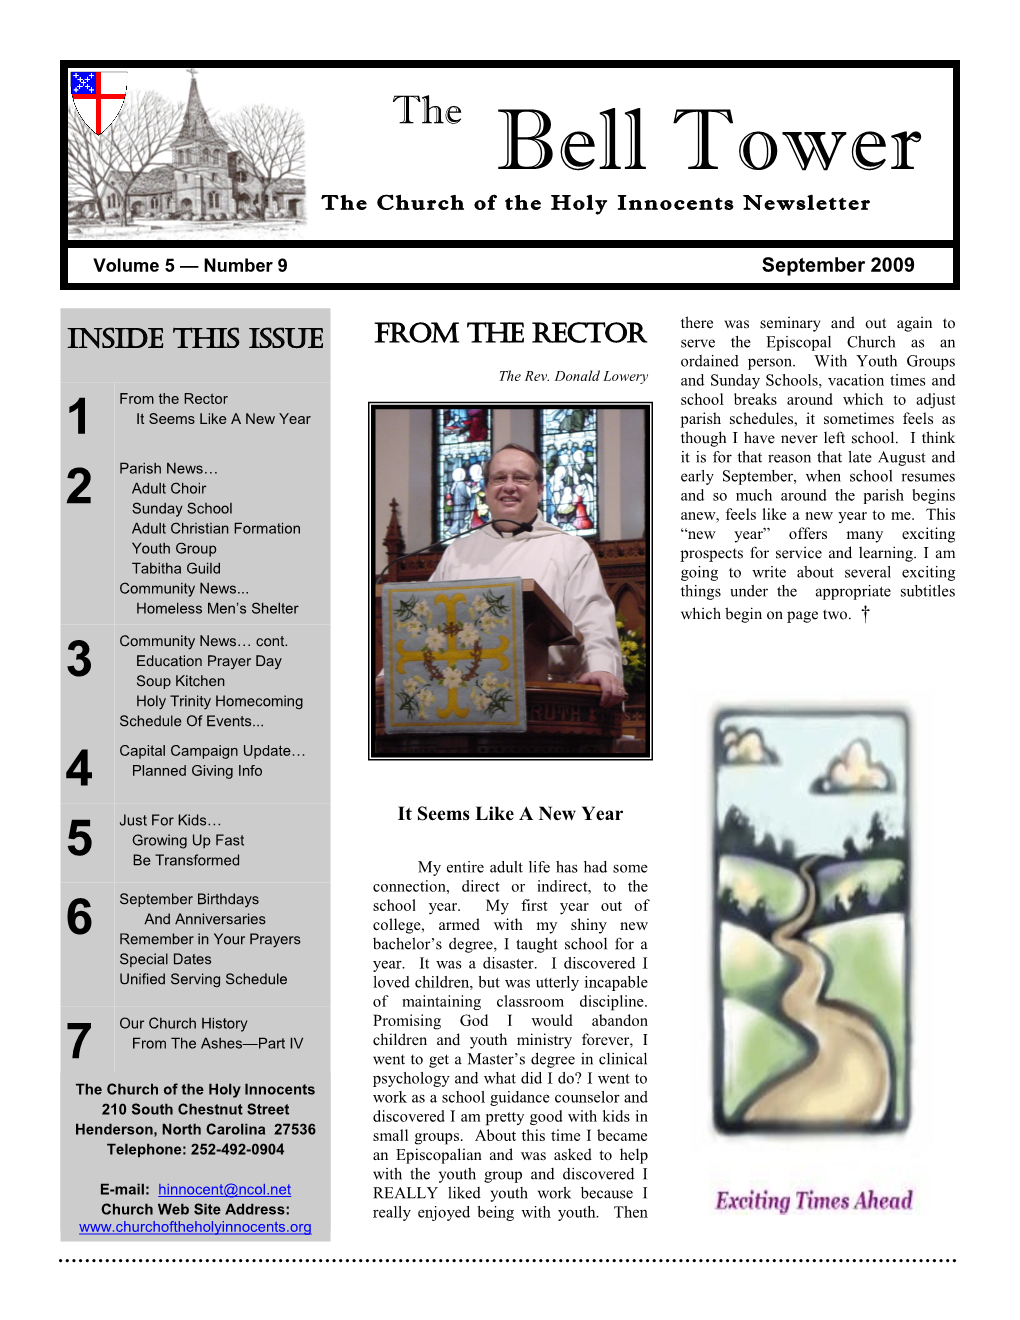 Bell Tower the Church of the Holy Innocents Newsletter